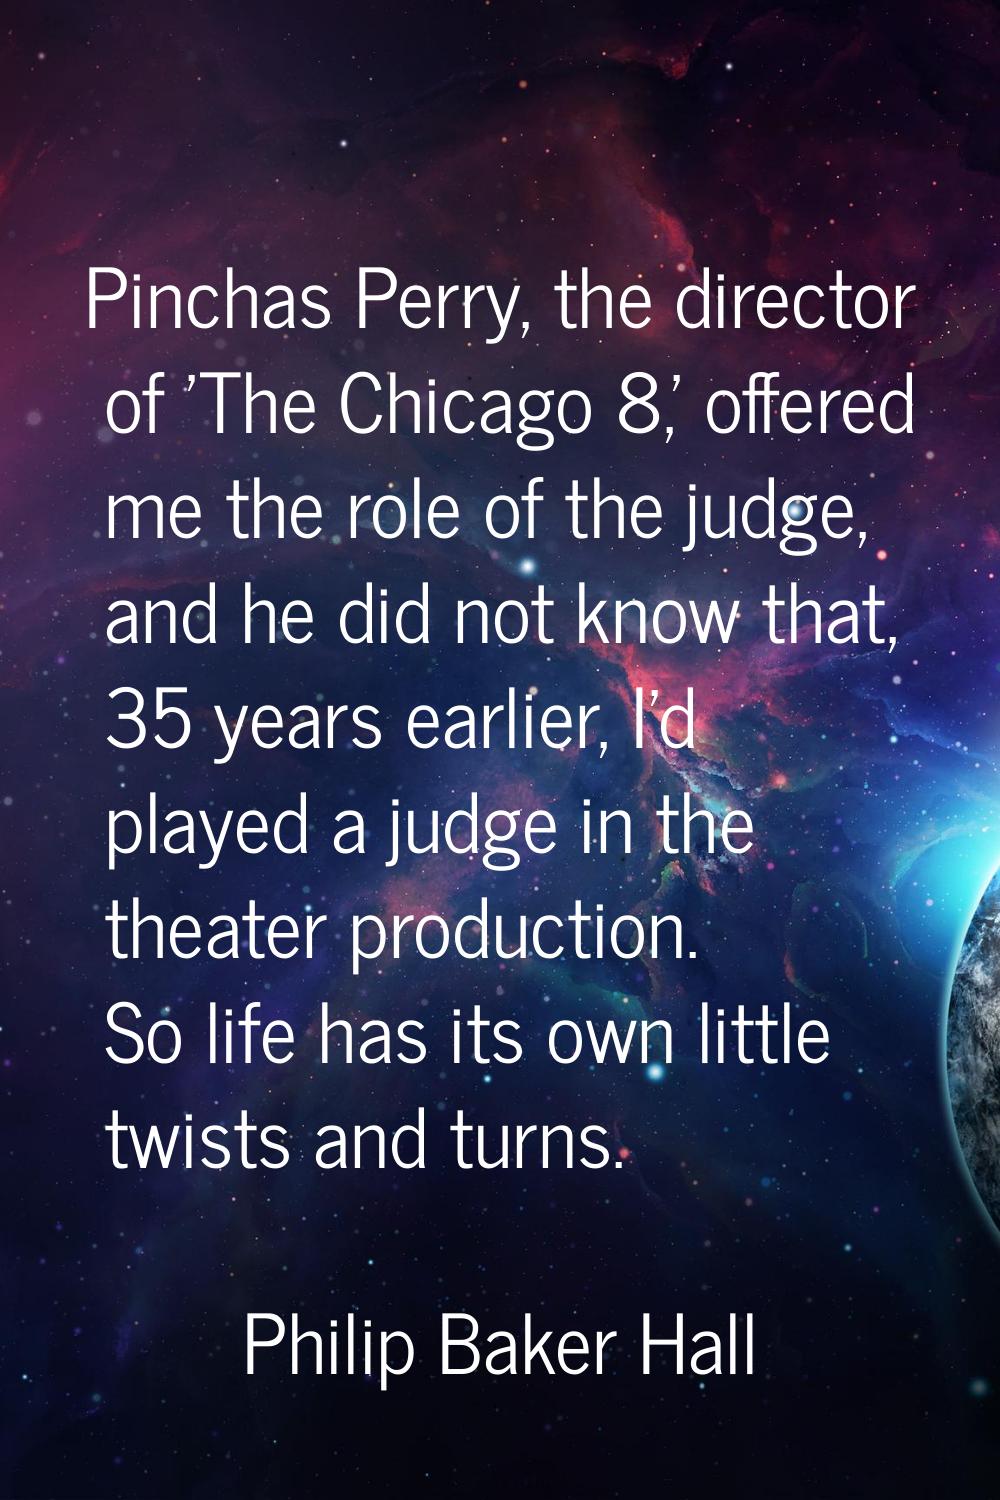 Pinchas Perry, the director of 'The Chicago 8,' offered me the role of the judge, and he did not kn